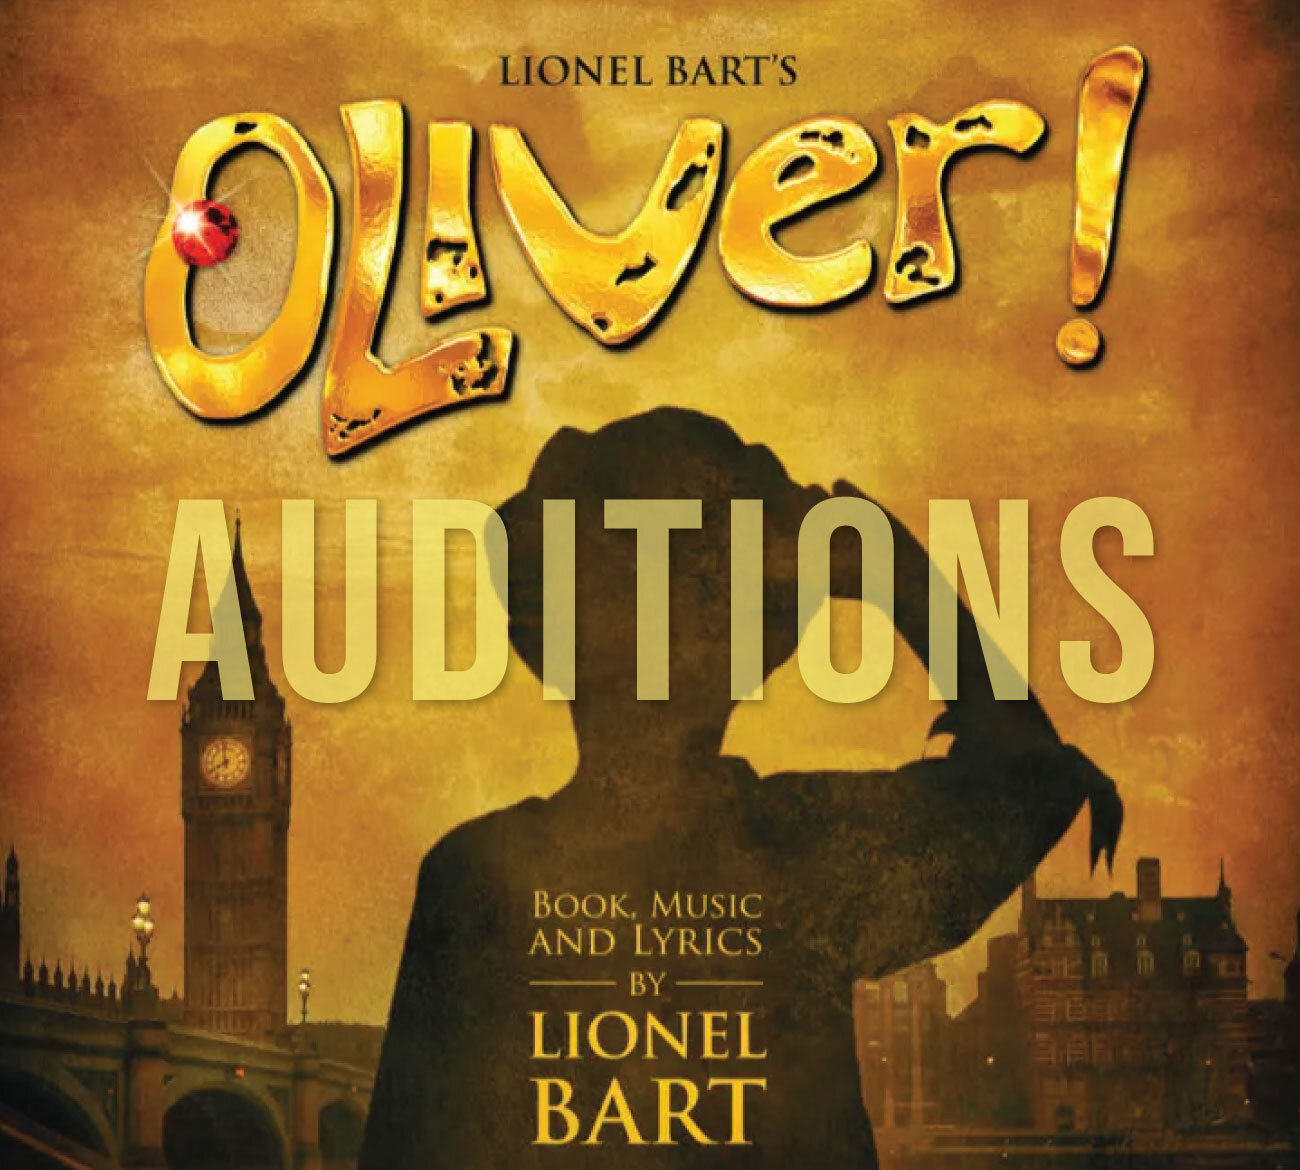 🎭 Calling all aspiring actors - We&rsquo;re thrilled to announce auditions for our upcoming production of Oliver! This award-winning musical promises to captivate audiences with its unforgettable characters and timeless songs. Come be a part of the 